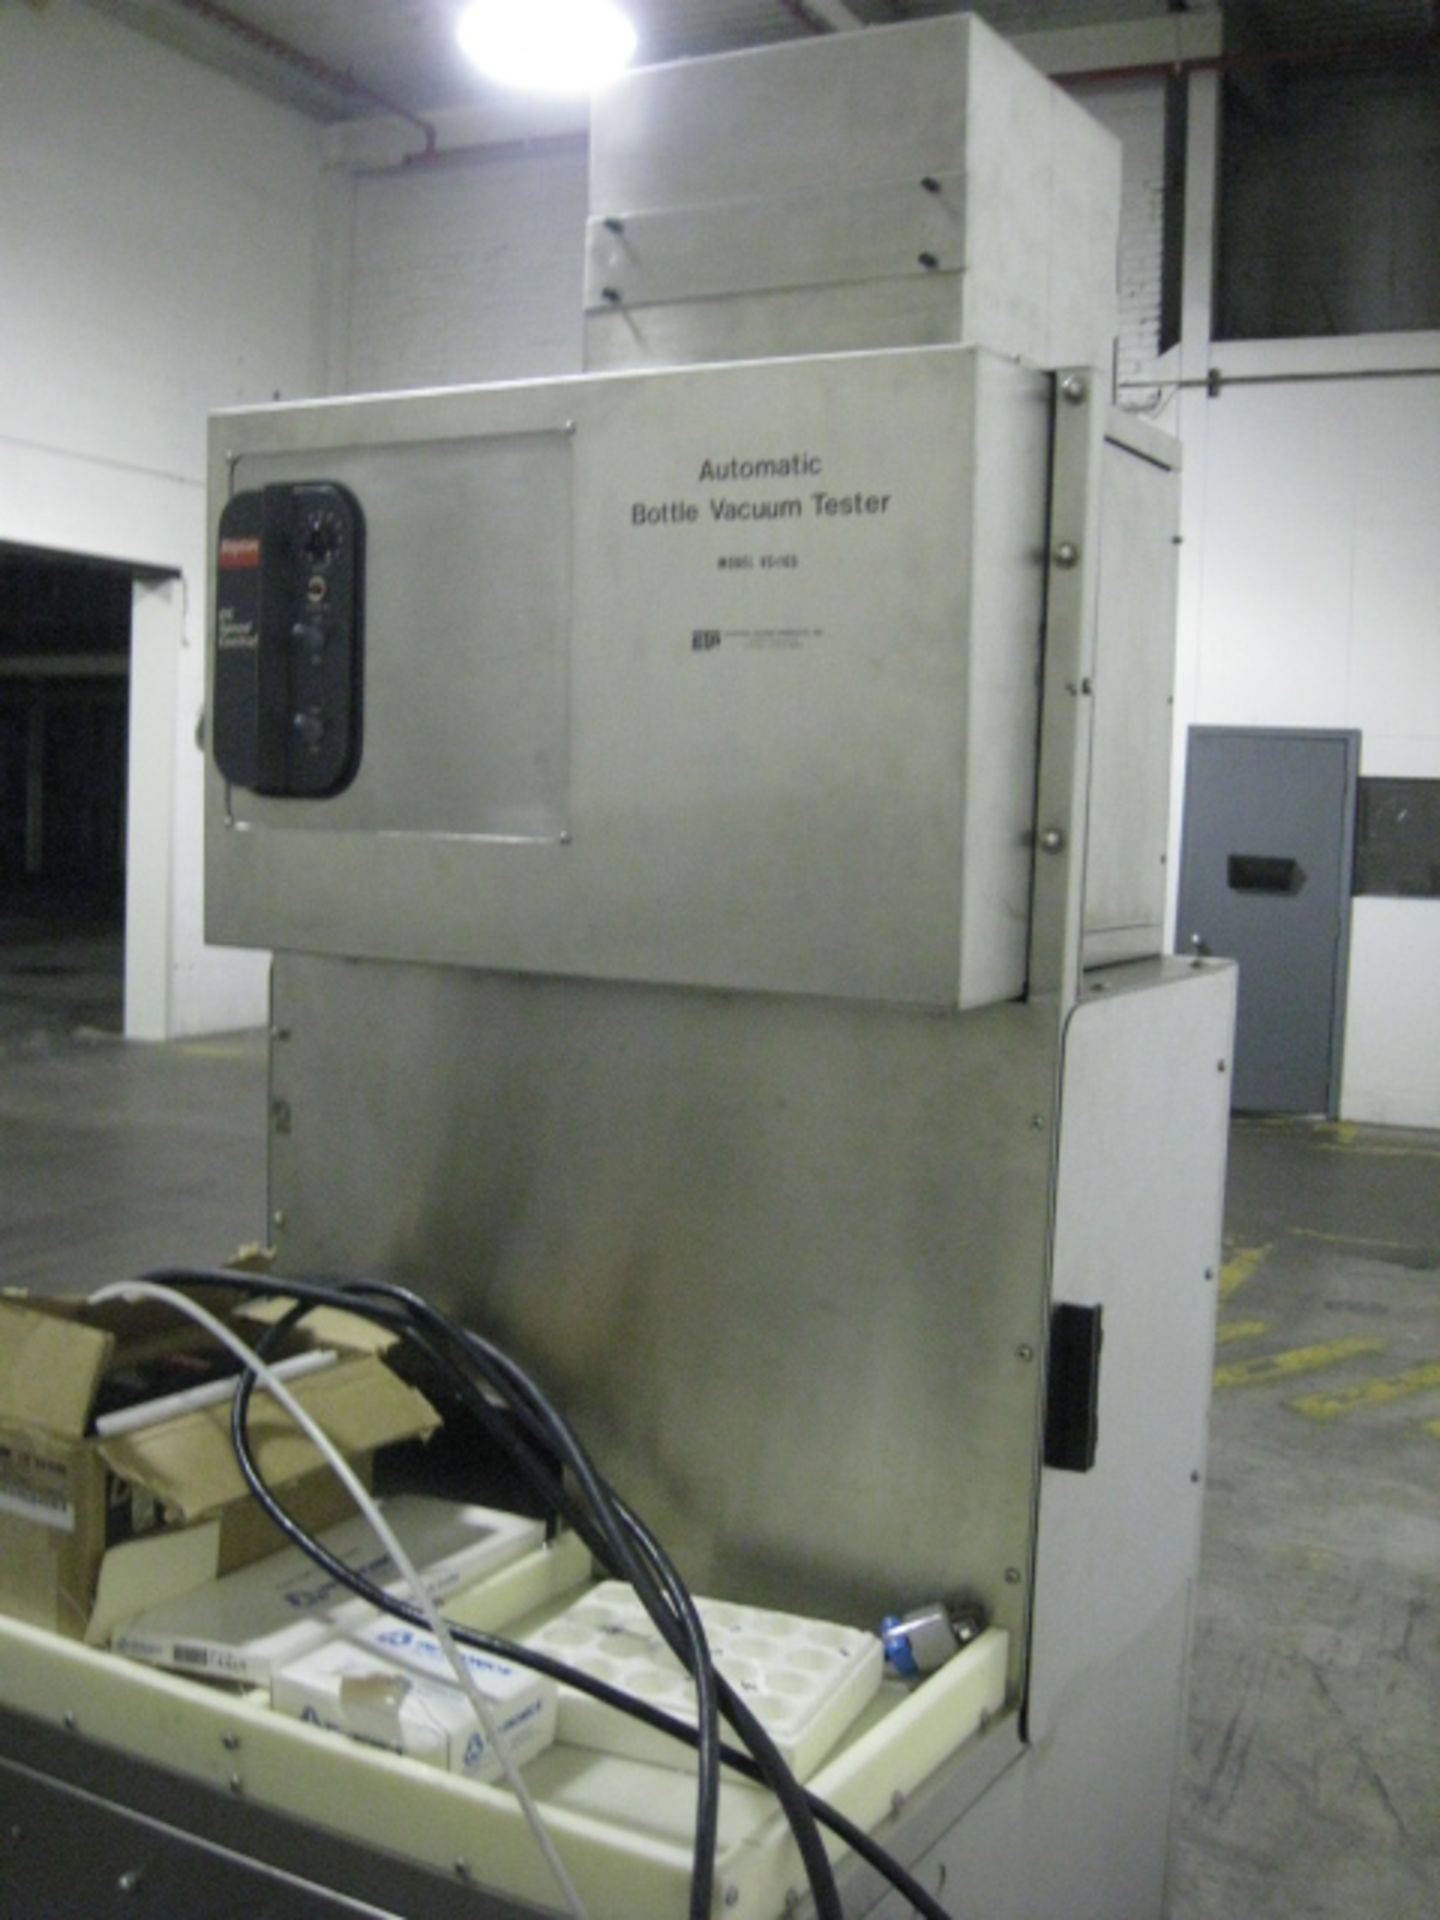 Electro Technic Products automated bottle vacuum tester, model VC-105 - Image 3 of 6